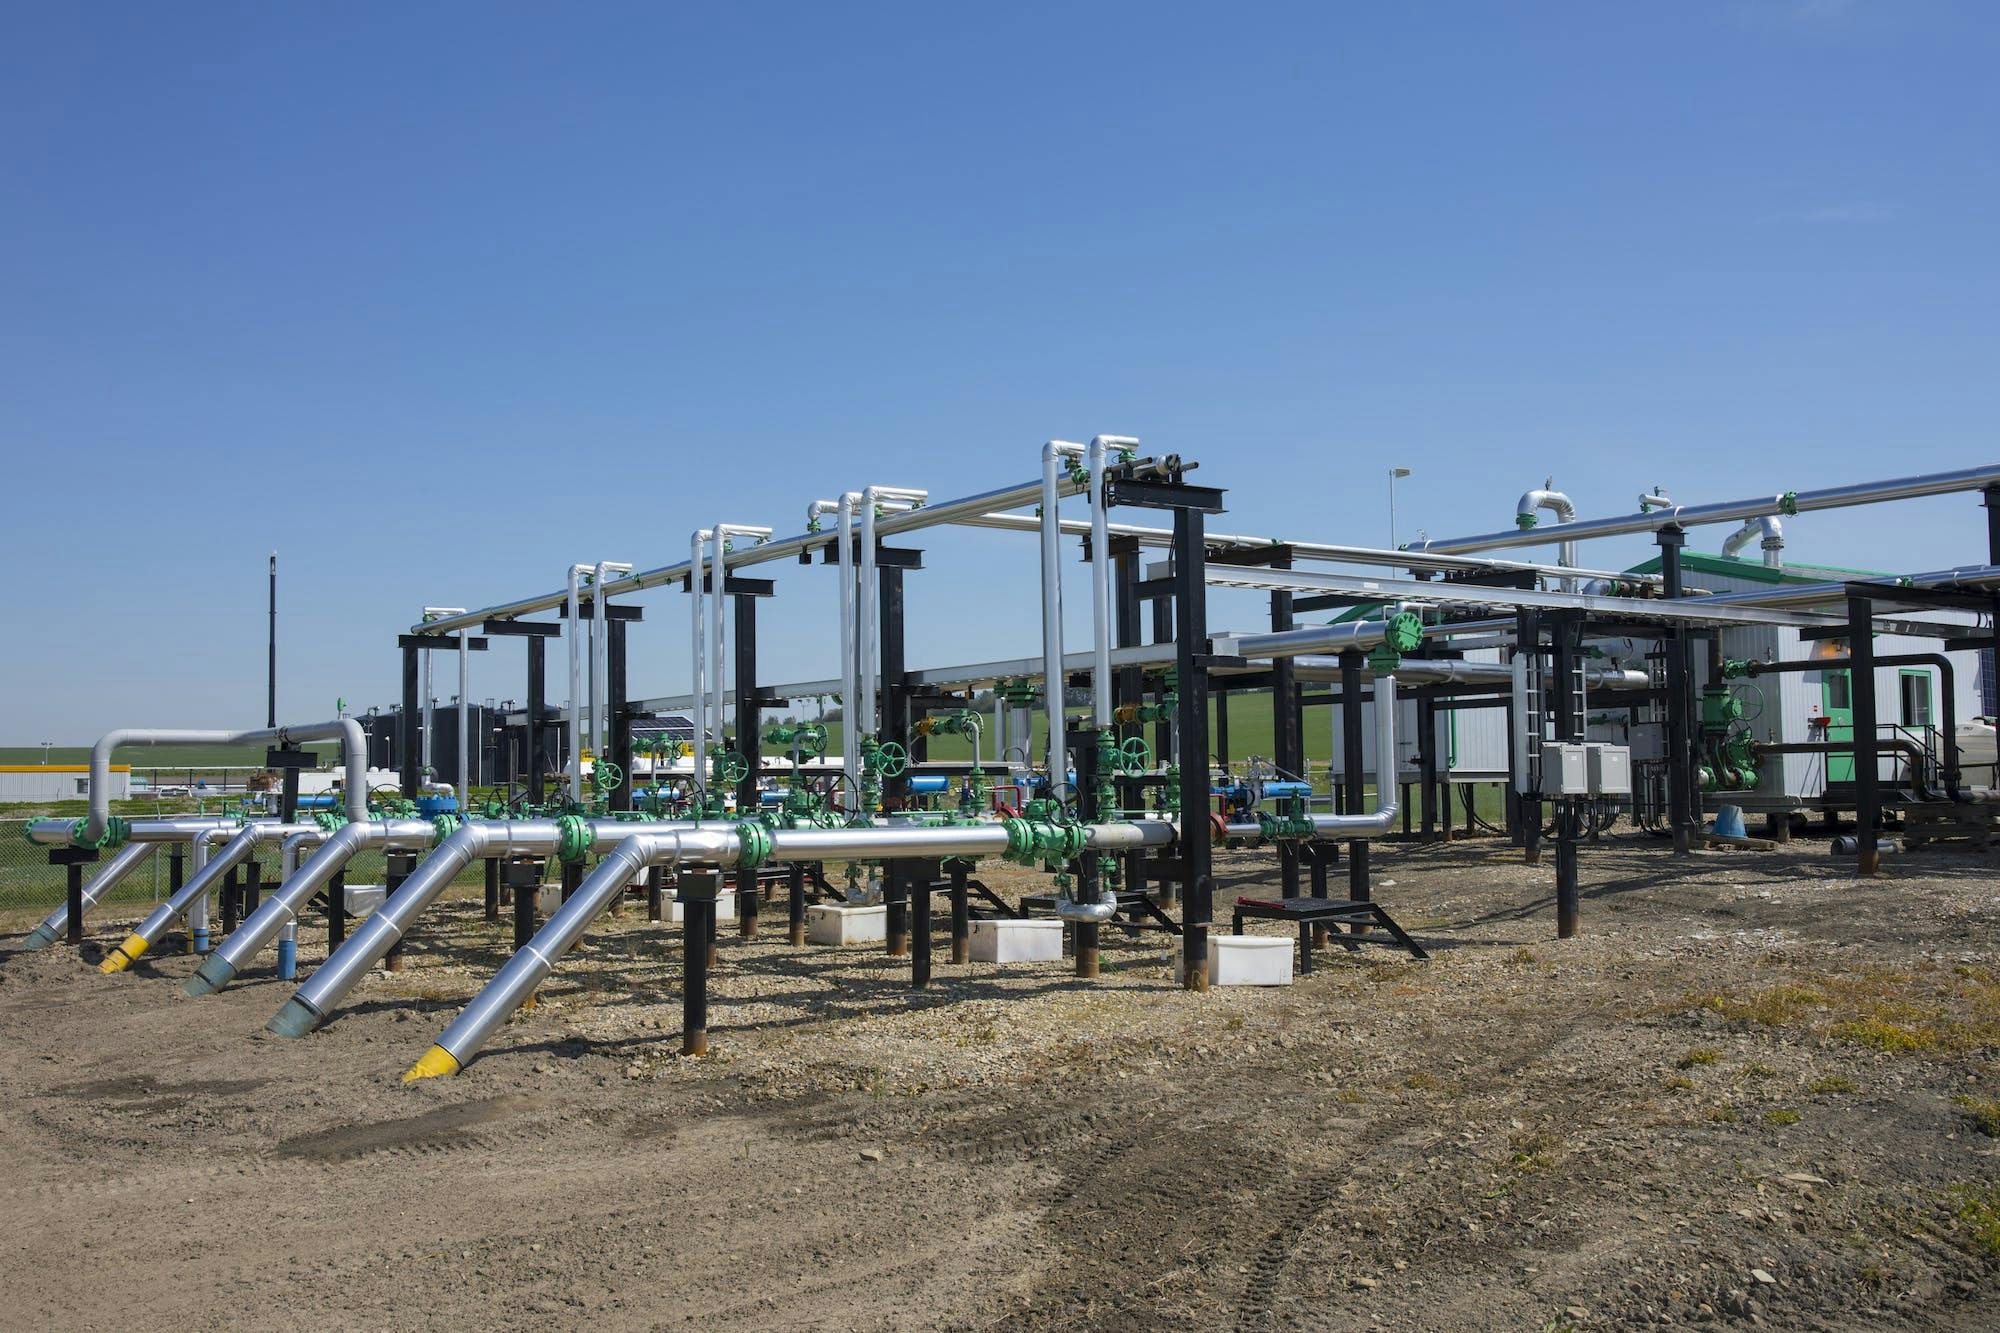 A row of pipes with green connectors, at a gas plant.